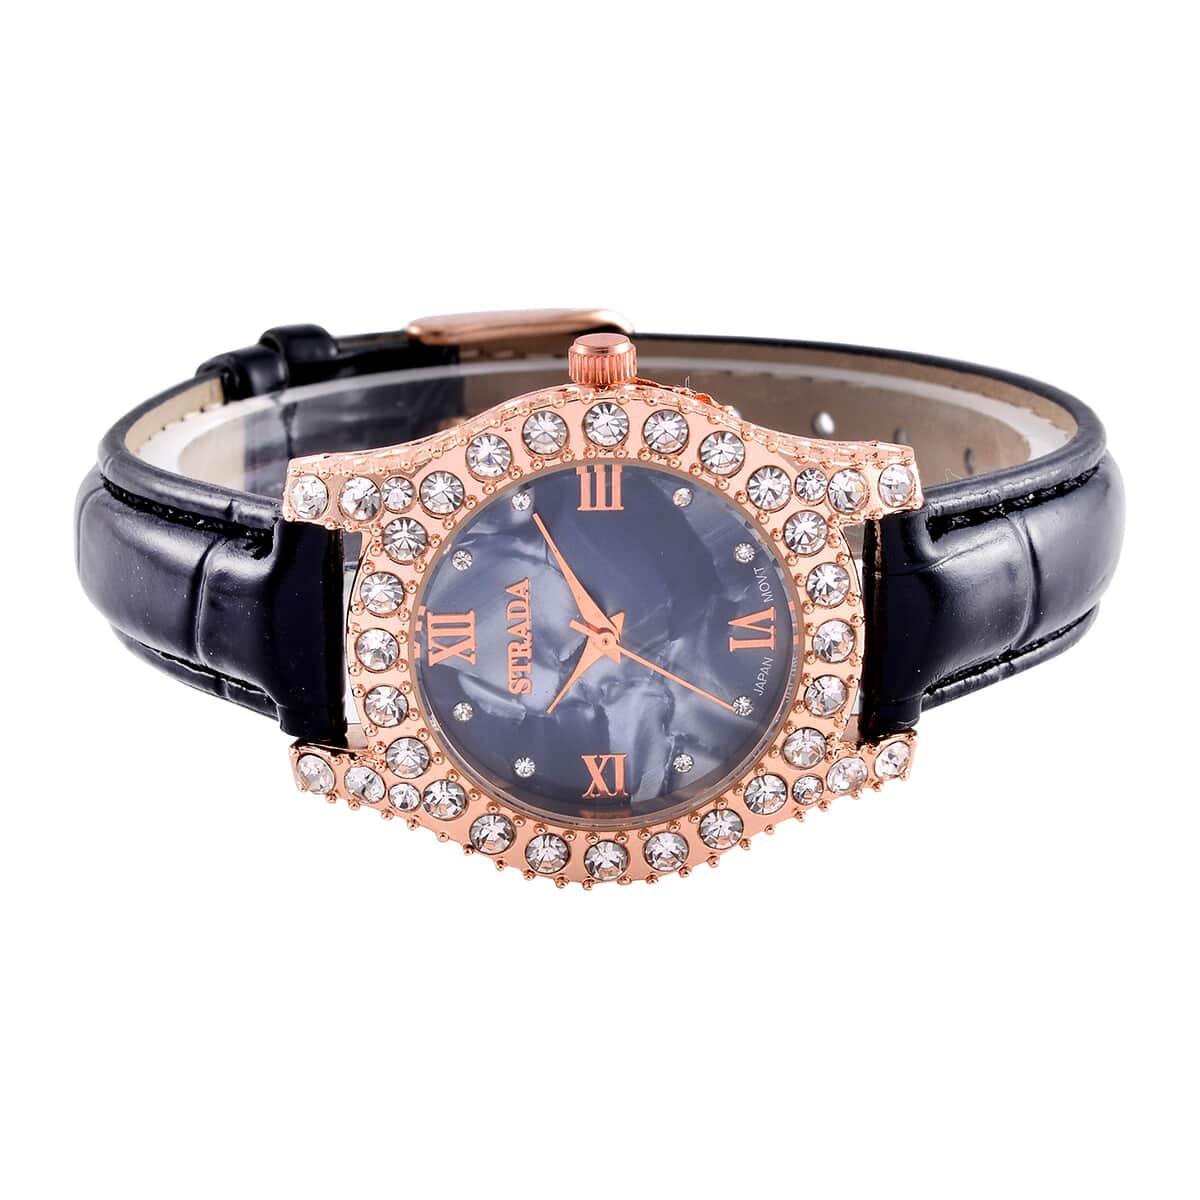 Strada Austrian Crystal Japanese Movement Watch in Rosetone with Black Faux Leather Strap (31.24 mm) (6.5-7.5 Inches) image number 4